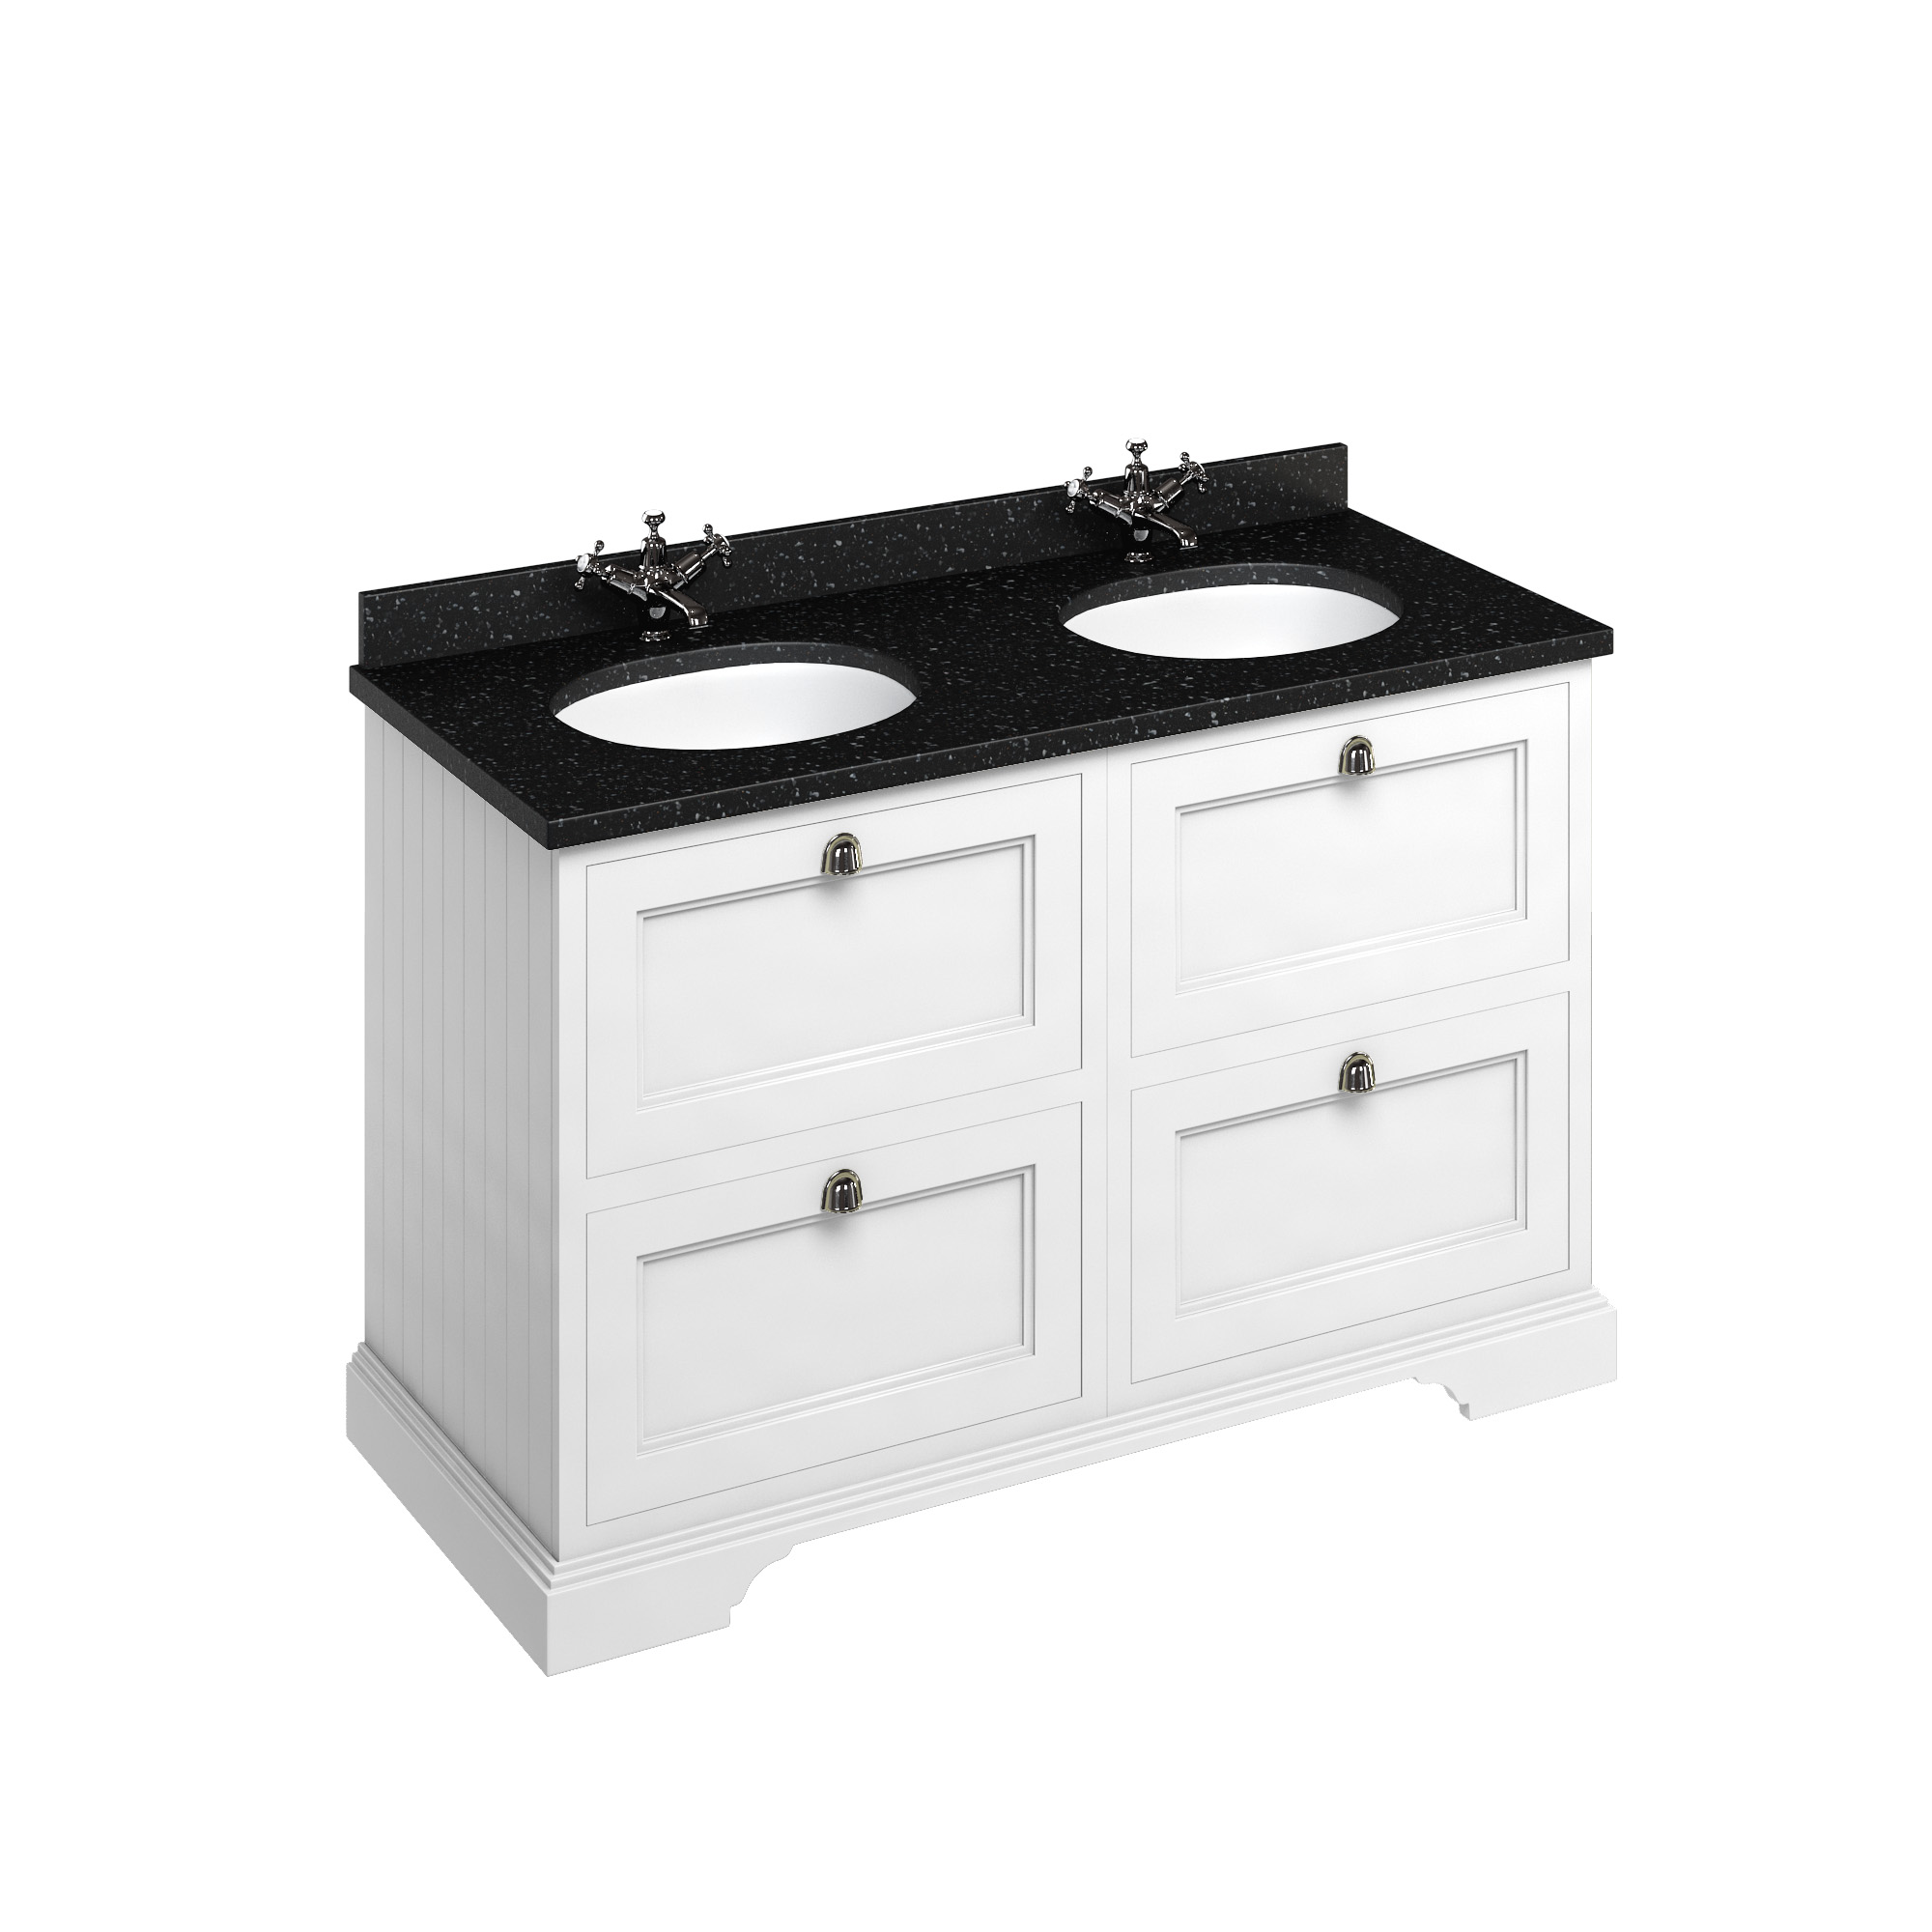 Freestanding 130 Vanity Unit with drawers - Matt White and Minerva black granite worktop with two integrated white basins